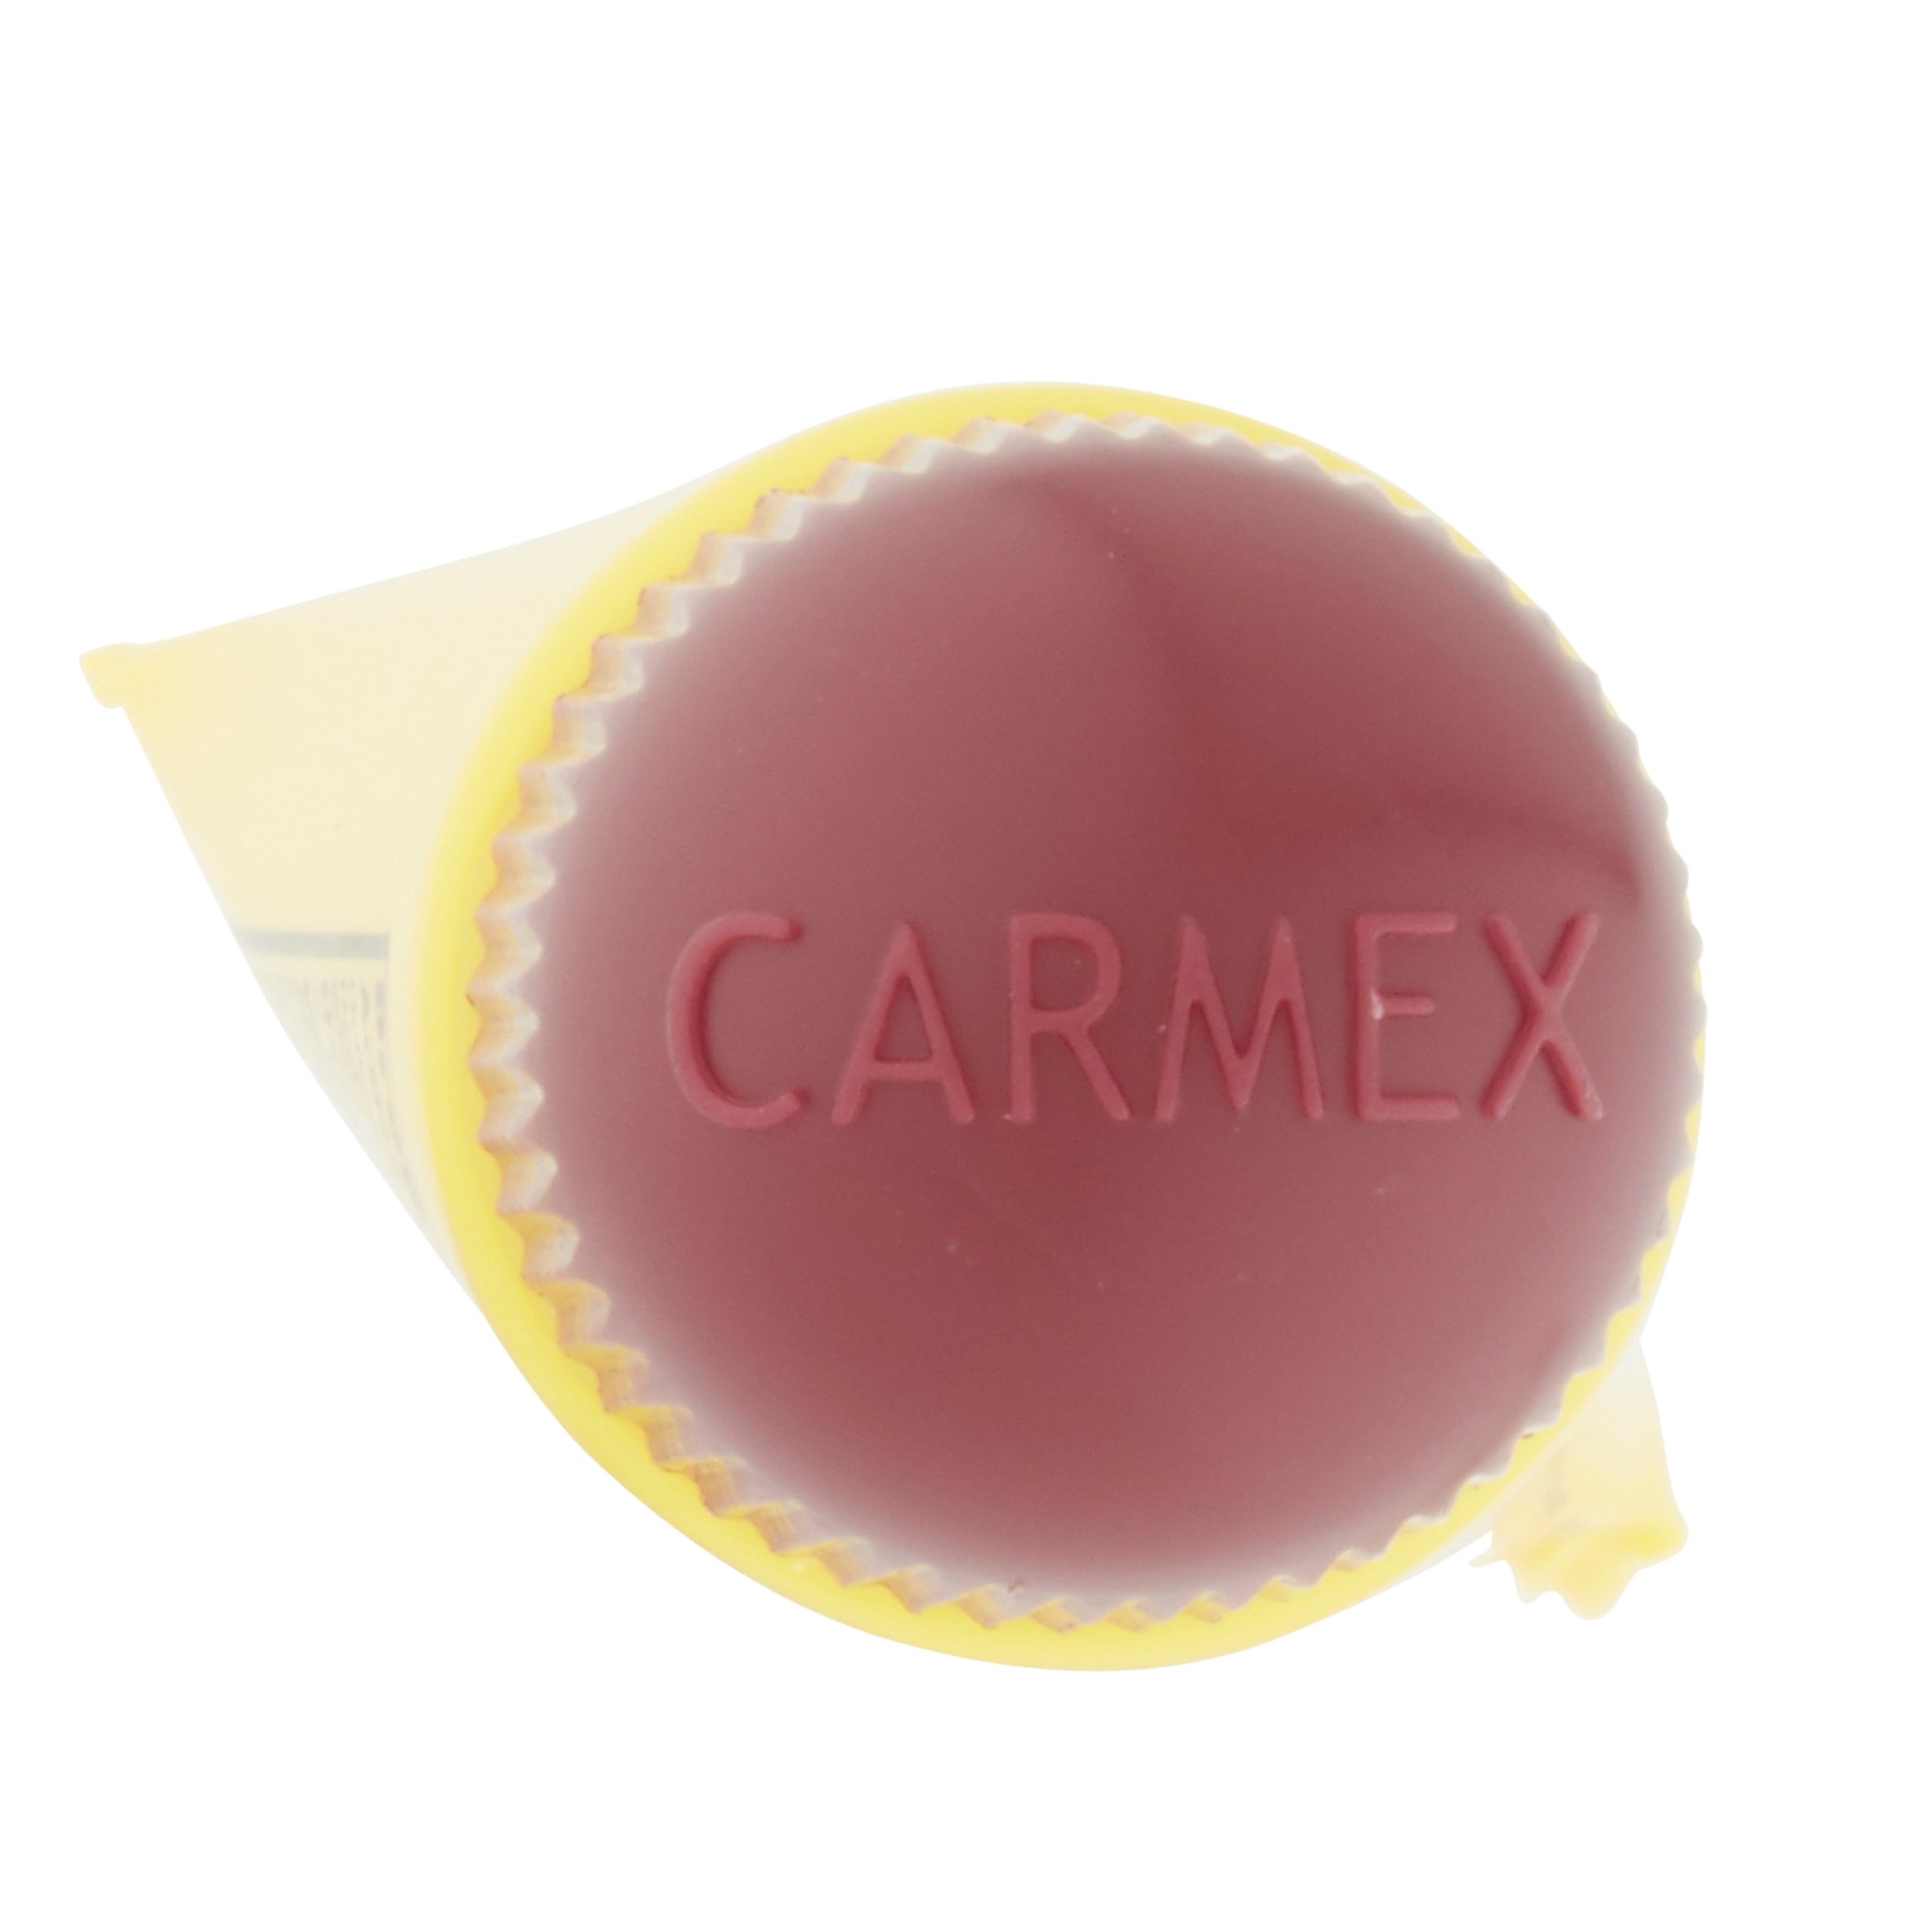 Carmex Cherry Flavor Tube .35 oz (Pack of 12) - image 5 of 6